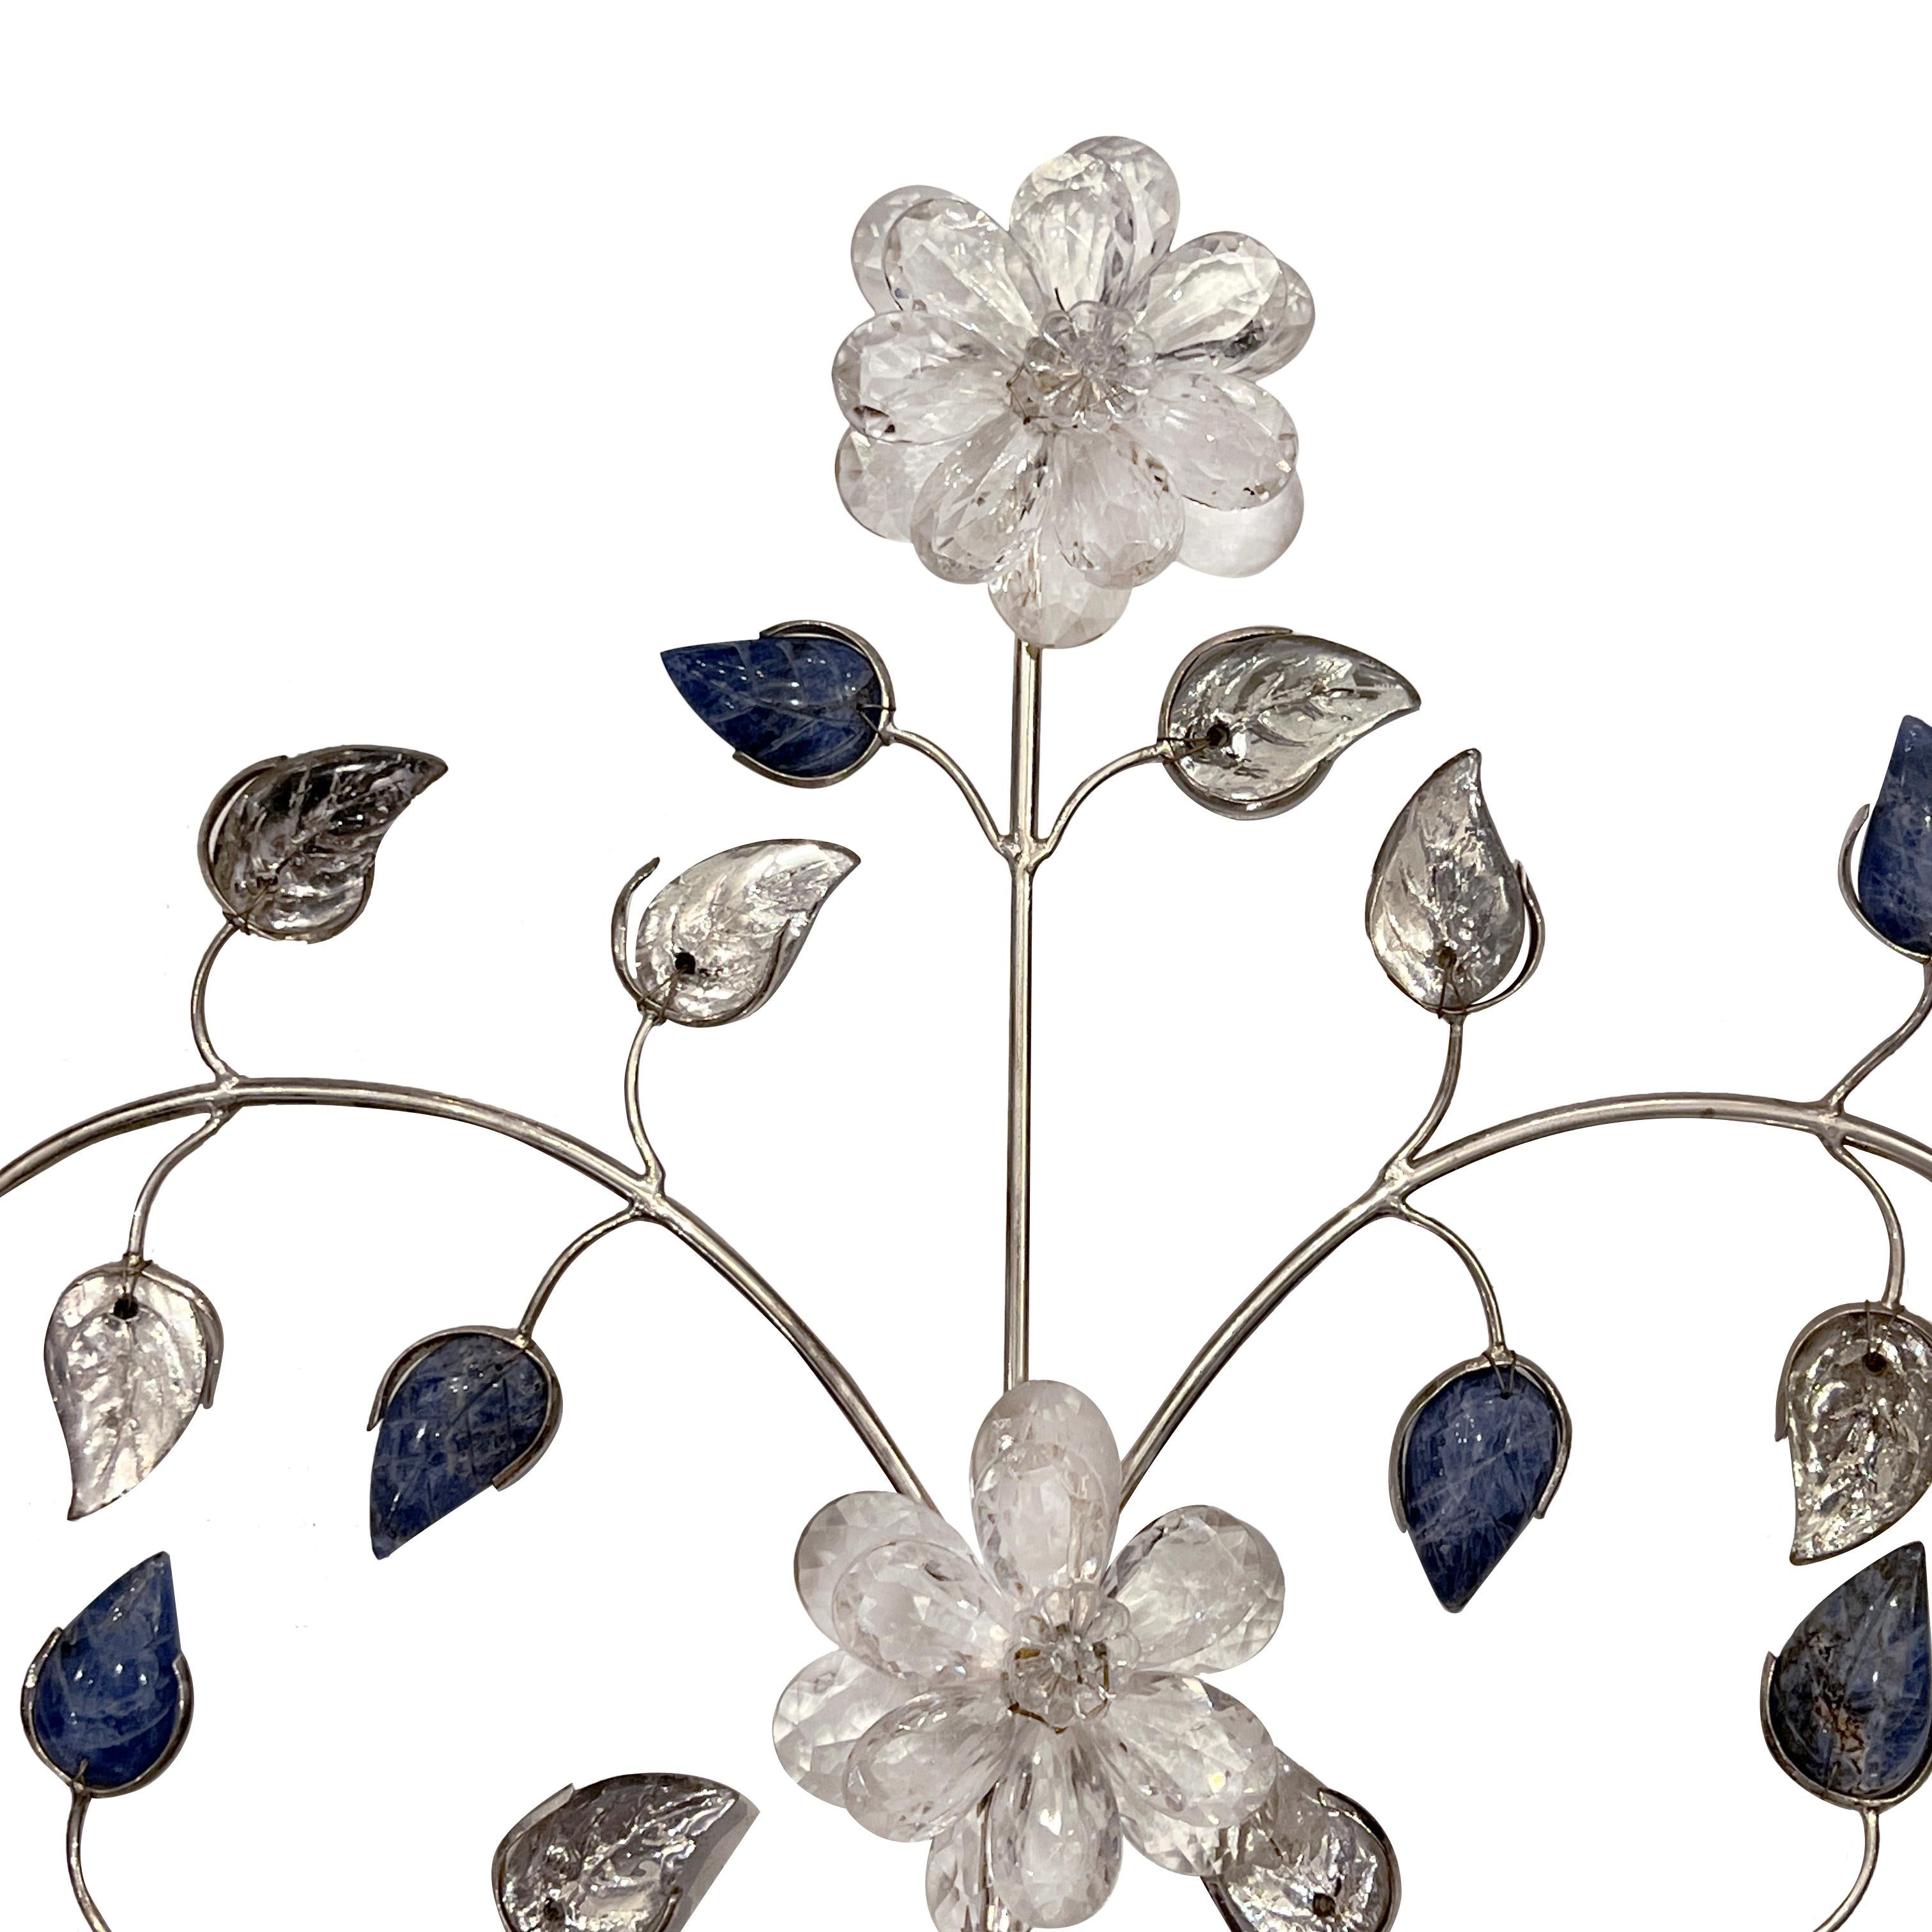 A set of 4 circa 1950's silver plated sconces with crystal leaves and flowers with lapis lazuli body.

Measurements:
Height: 26